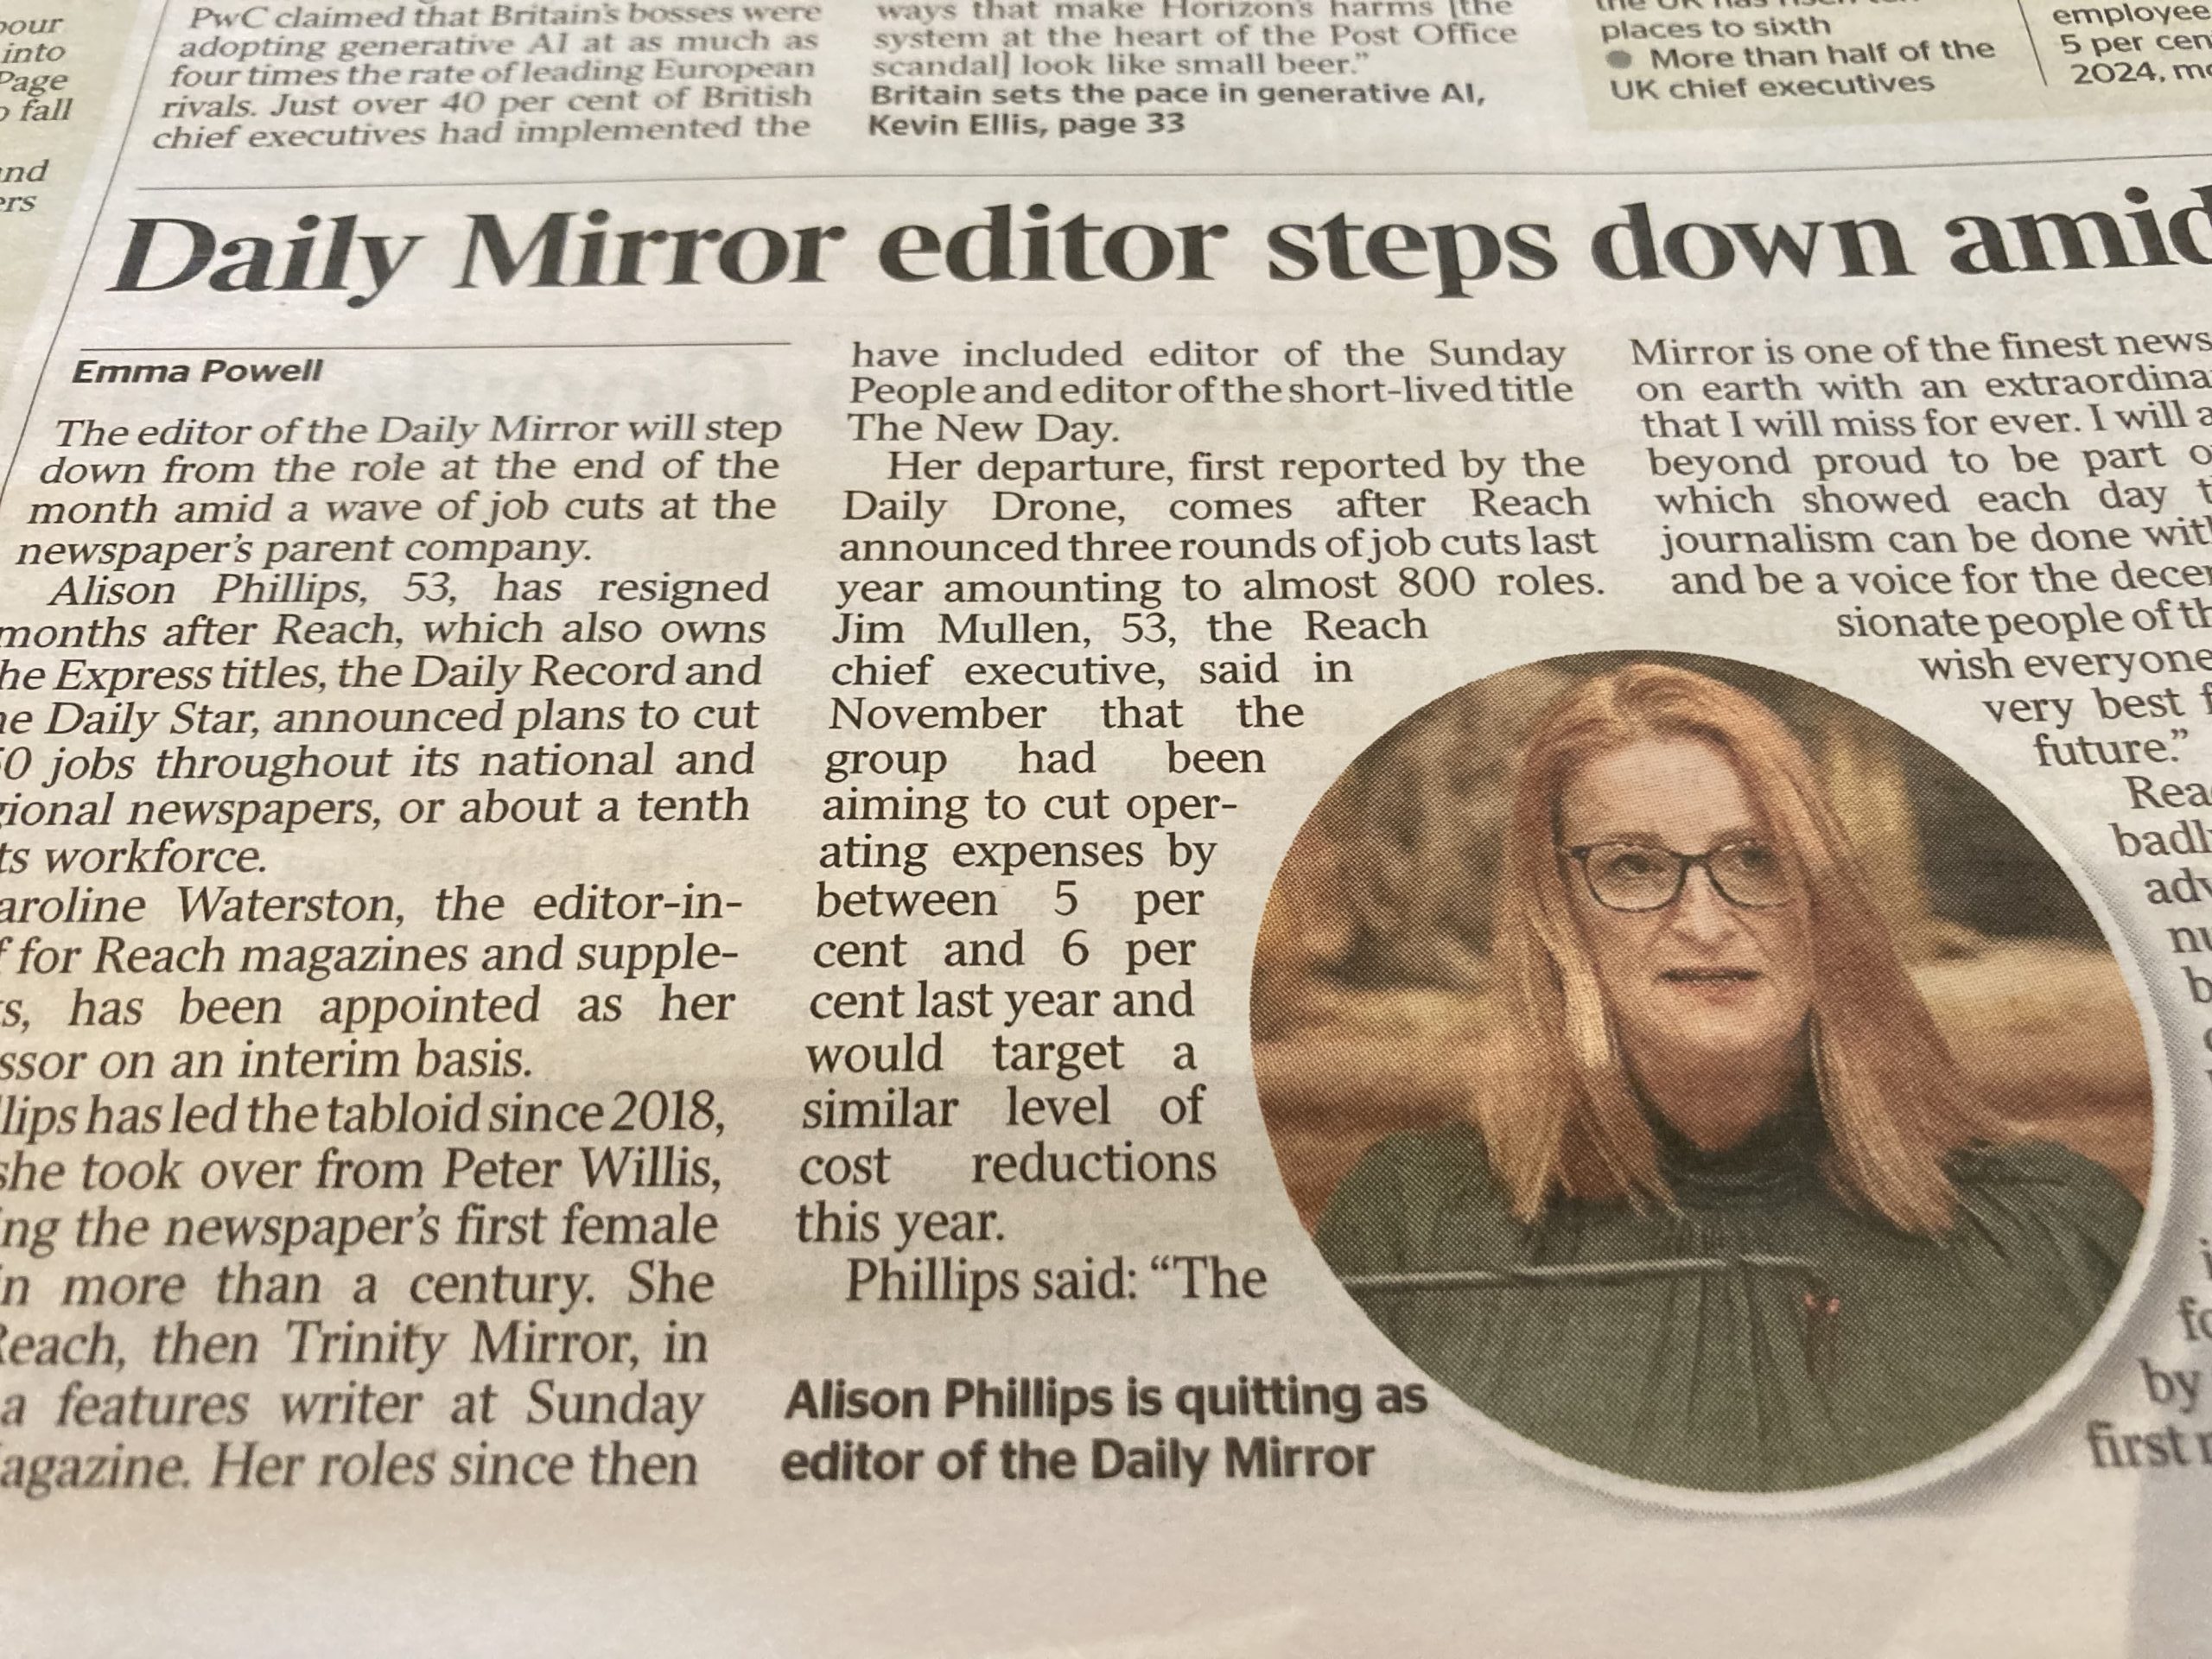 Times report on Alison Phillips